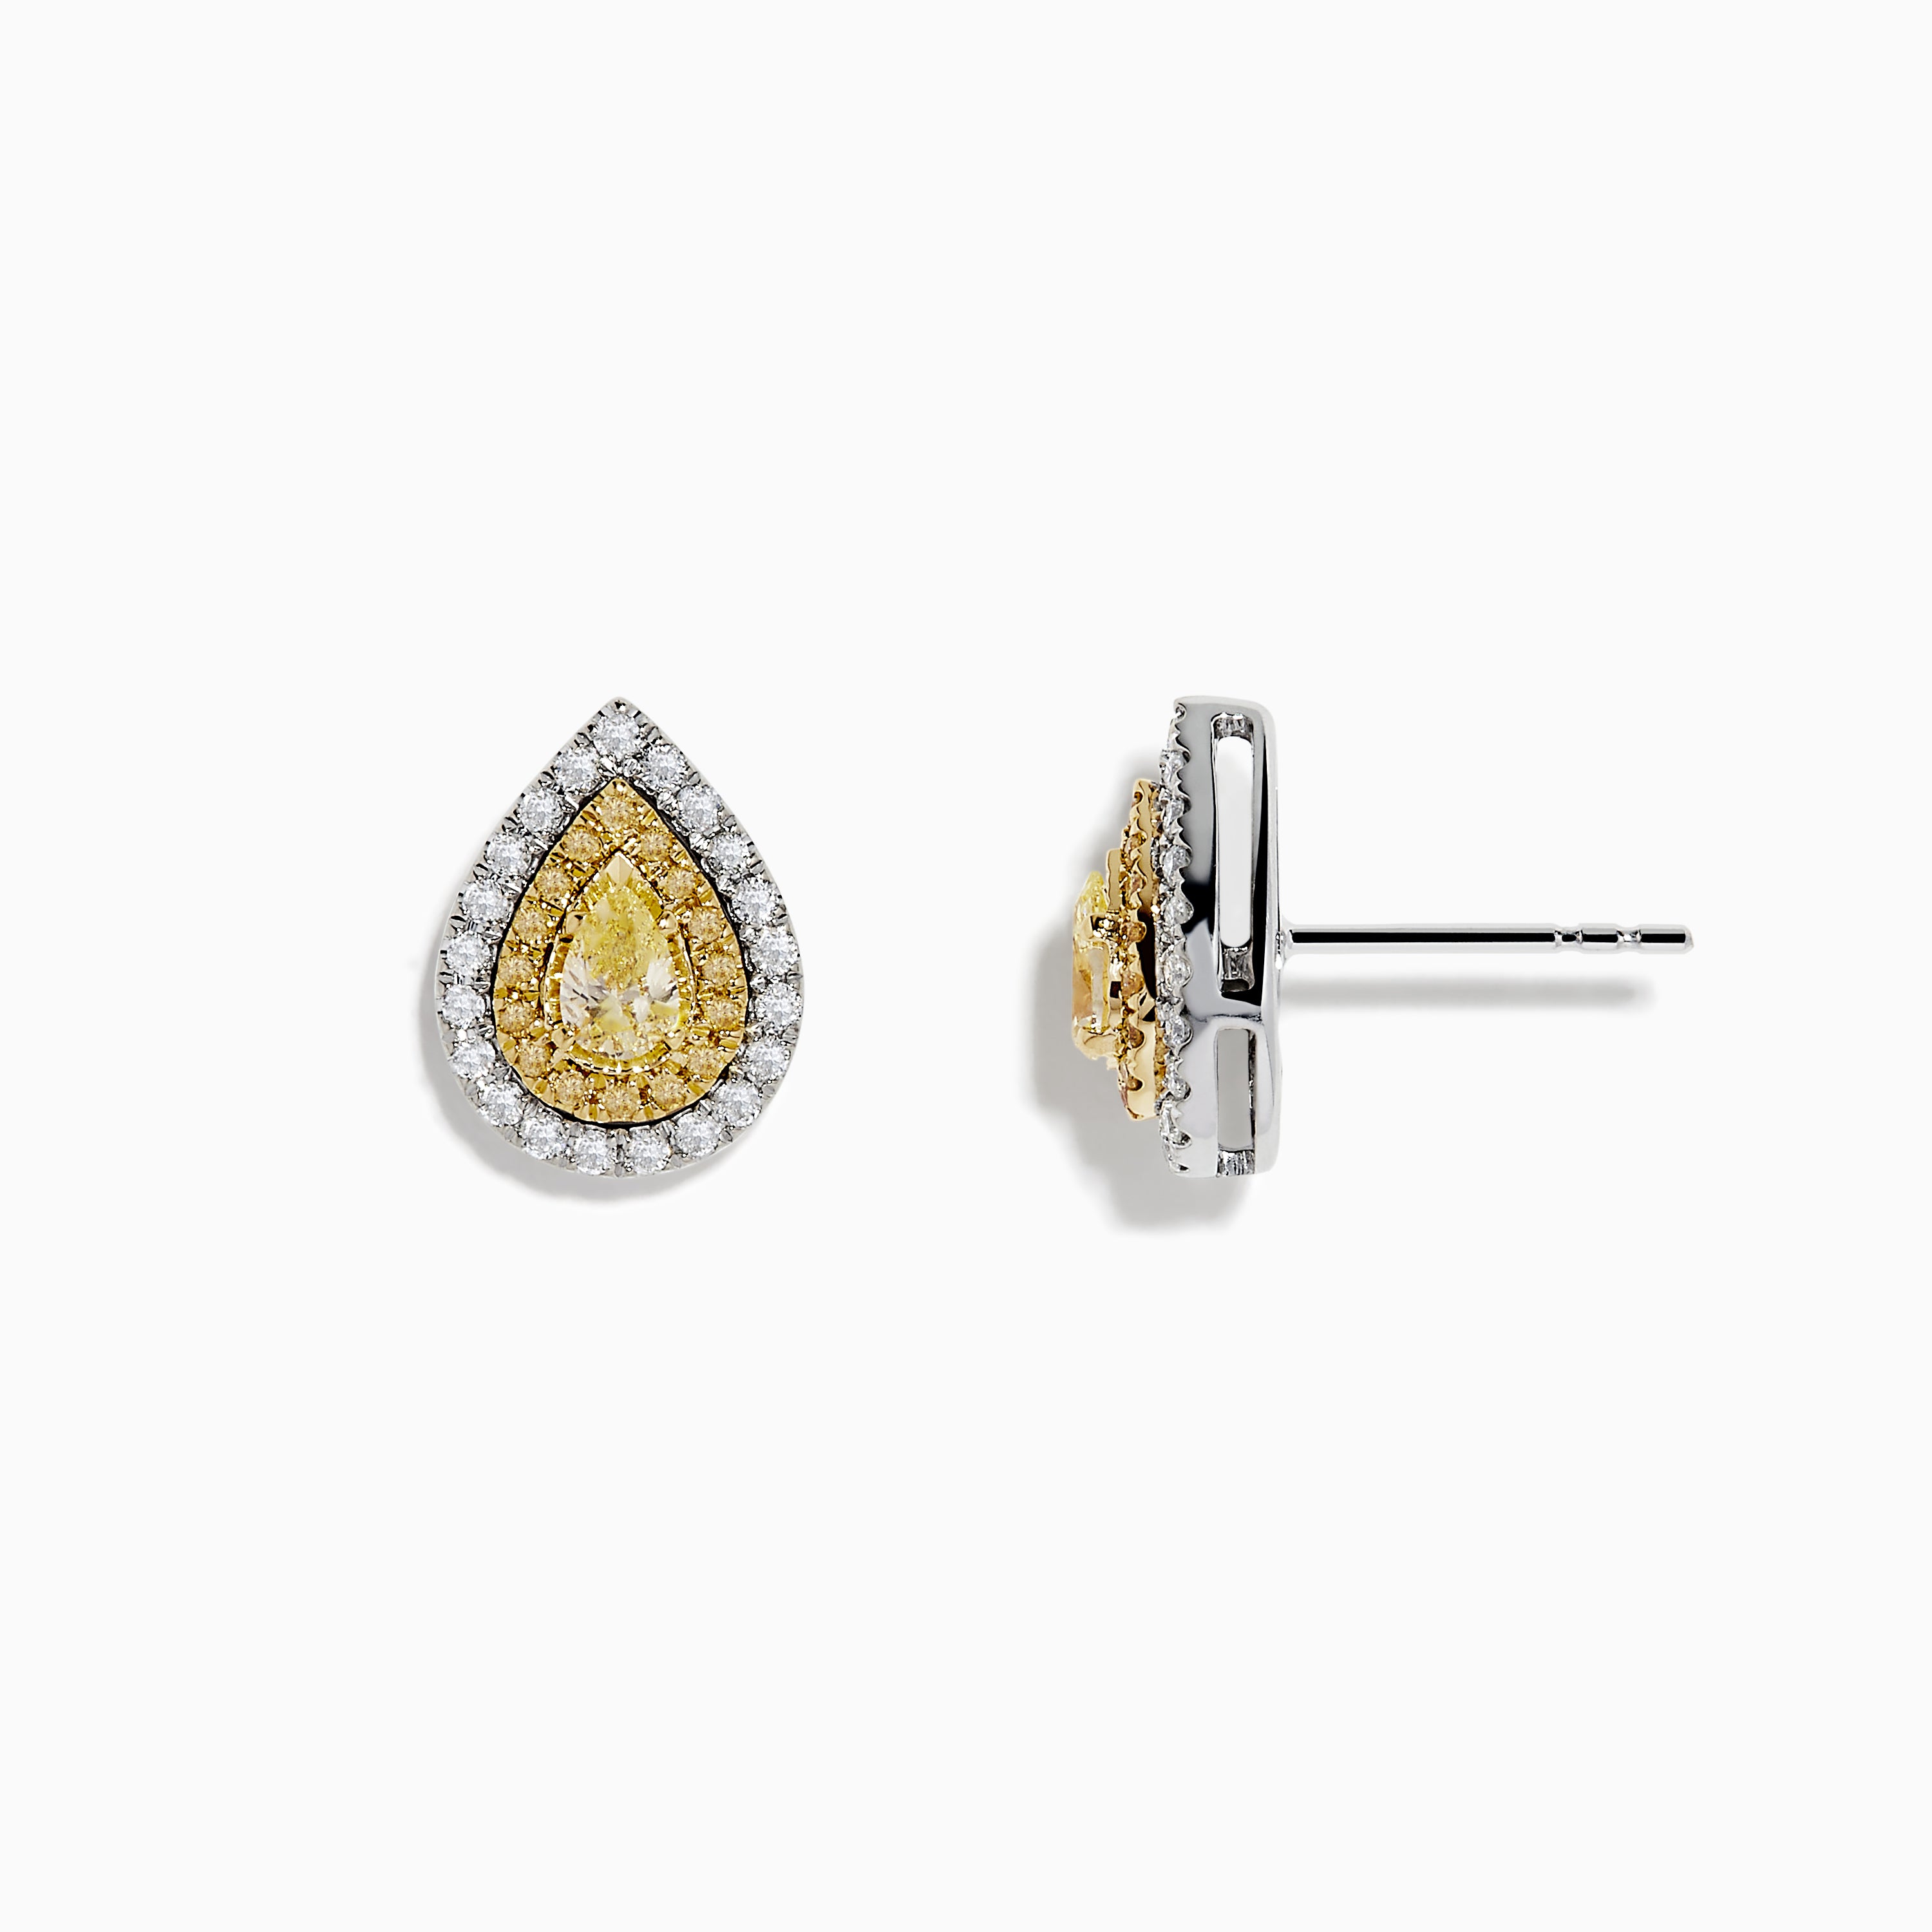 Effy Canare 18k Two Tone Yellow and White Diamond Stud Earrings